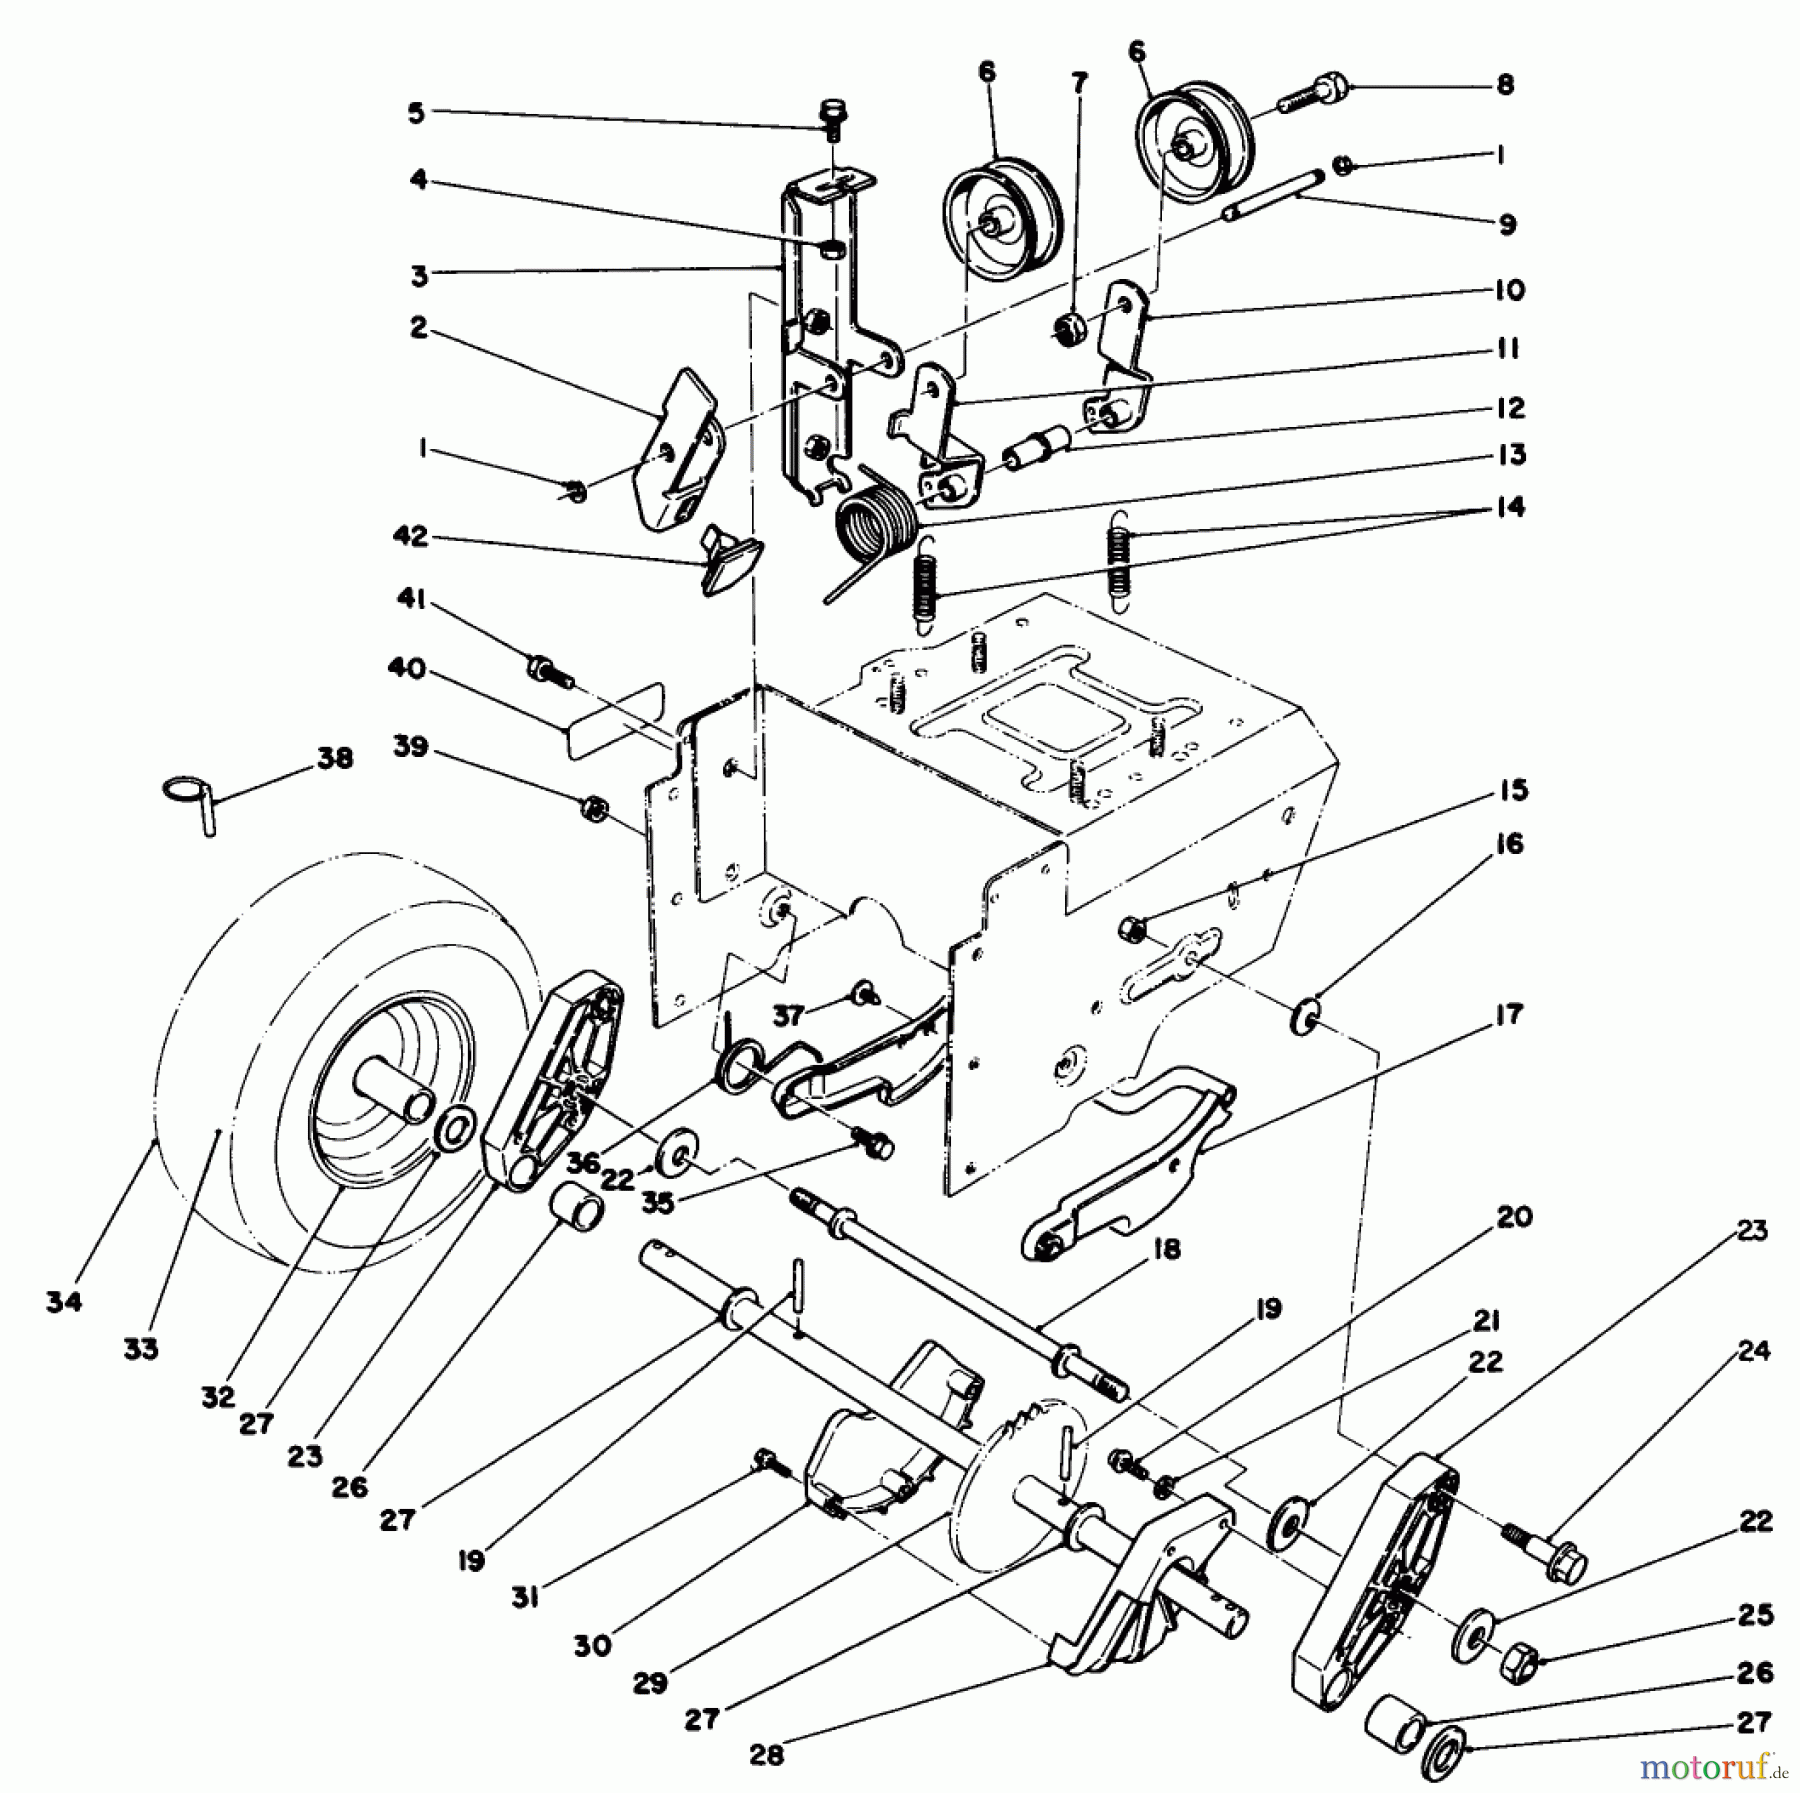  Toro Neu Snow Blowers/Snow Throwers Seite 1 38510 (624) - Toro 624 Power Shift Snowthrower, 1991 (1000001-1999999) TRACTION DRIVE ASSEMBLY